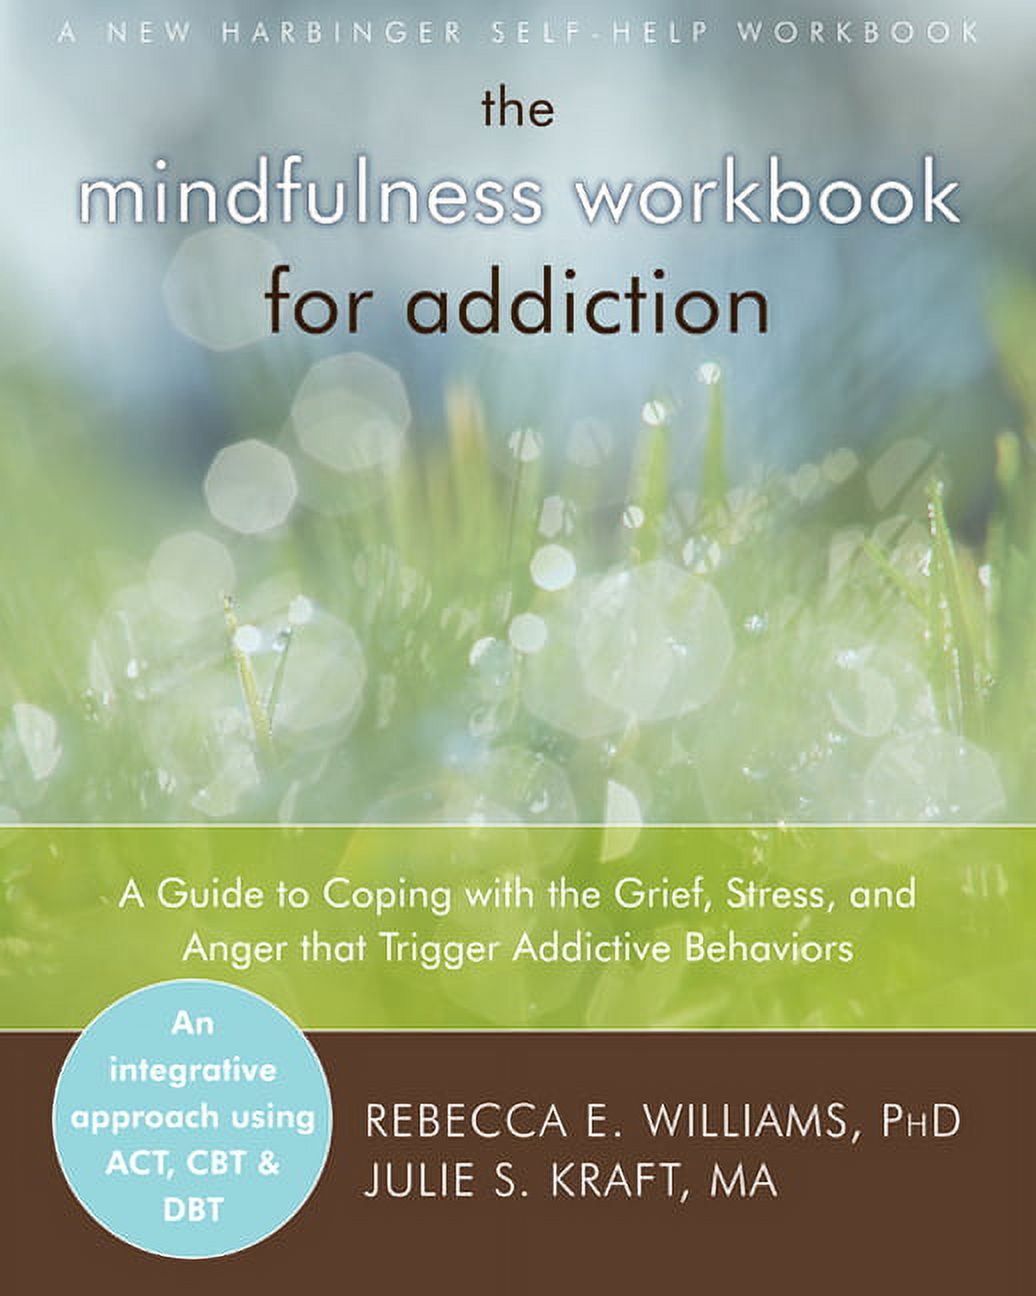 The Mindfulness Workbook for Addiction : A Guide to Coping with the Grief, Stress and Anger that Trigger Addictive Behaviors (Paperback) - image 1 of 1